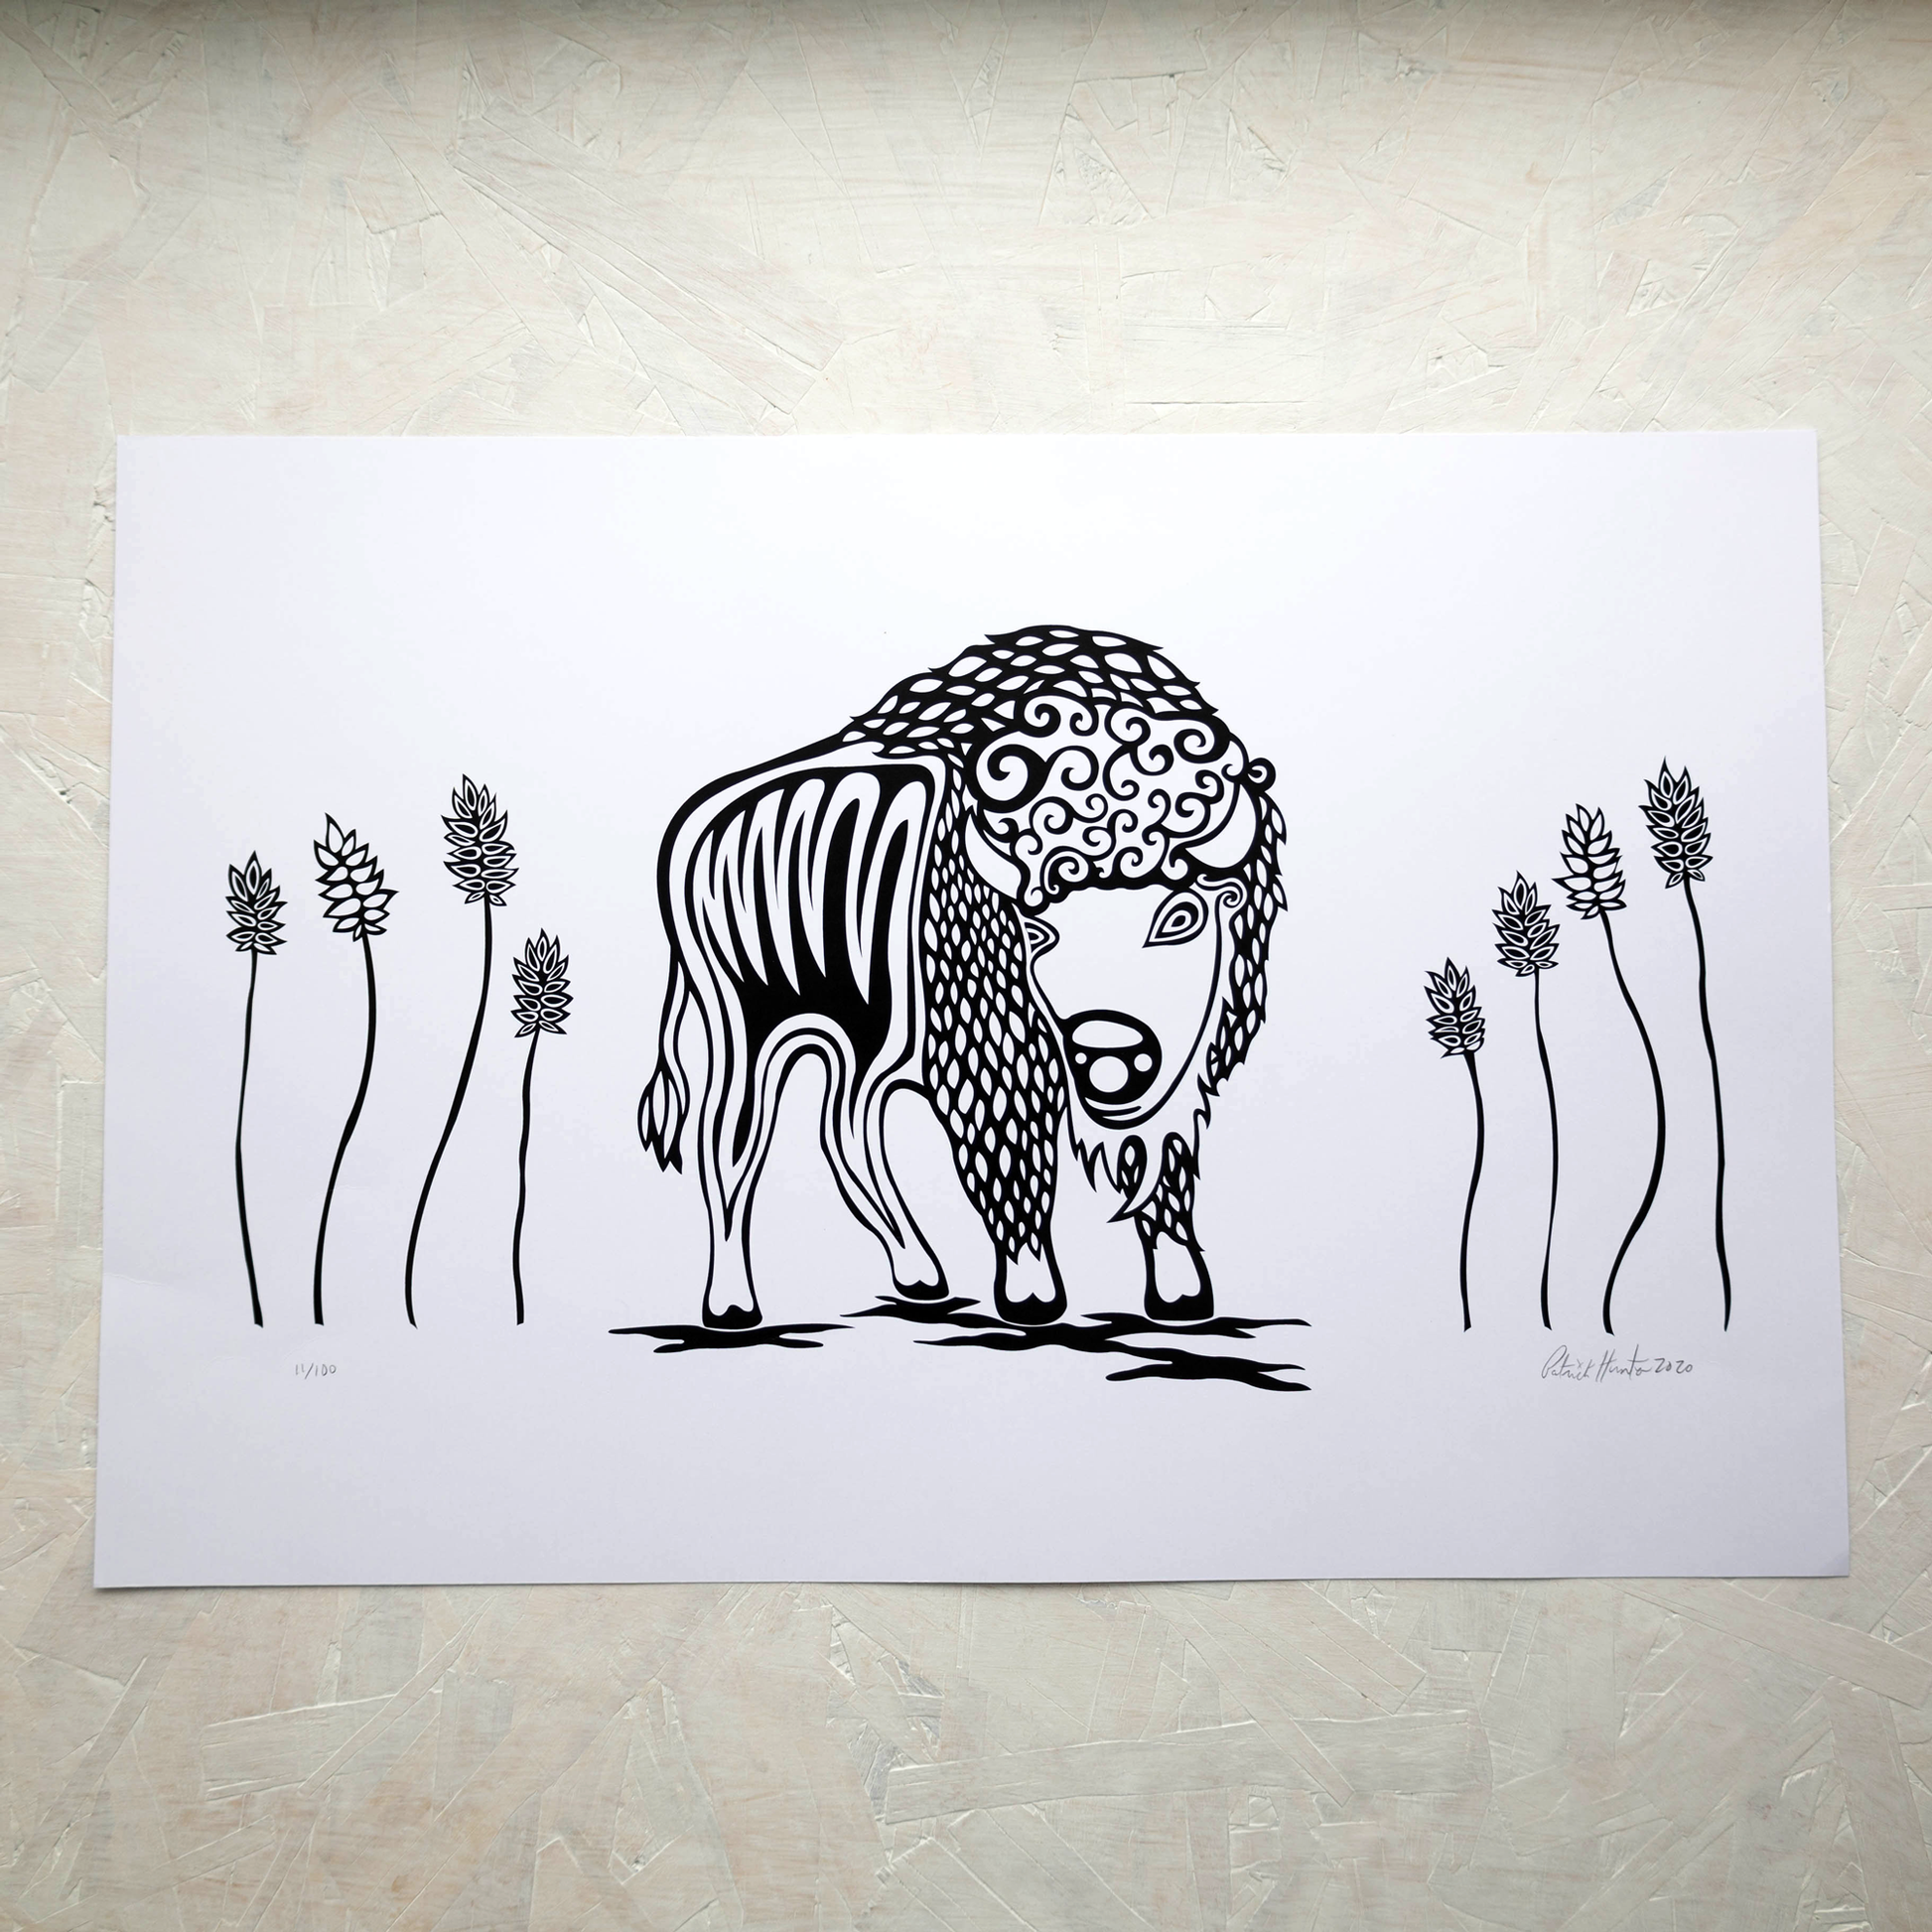 Print of Patrick Hunter's painting of a buffalo amongst tall prairie grass in black and white woodland art style.